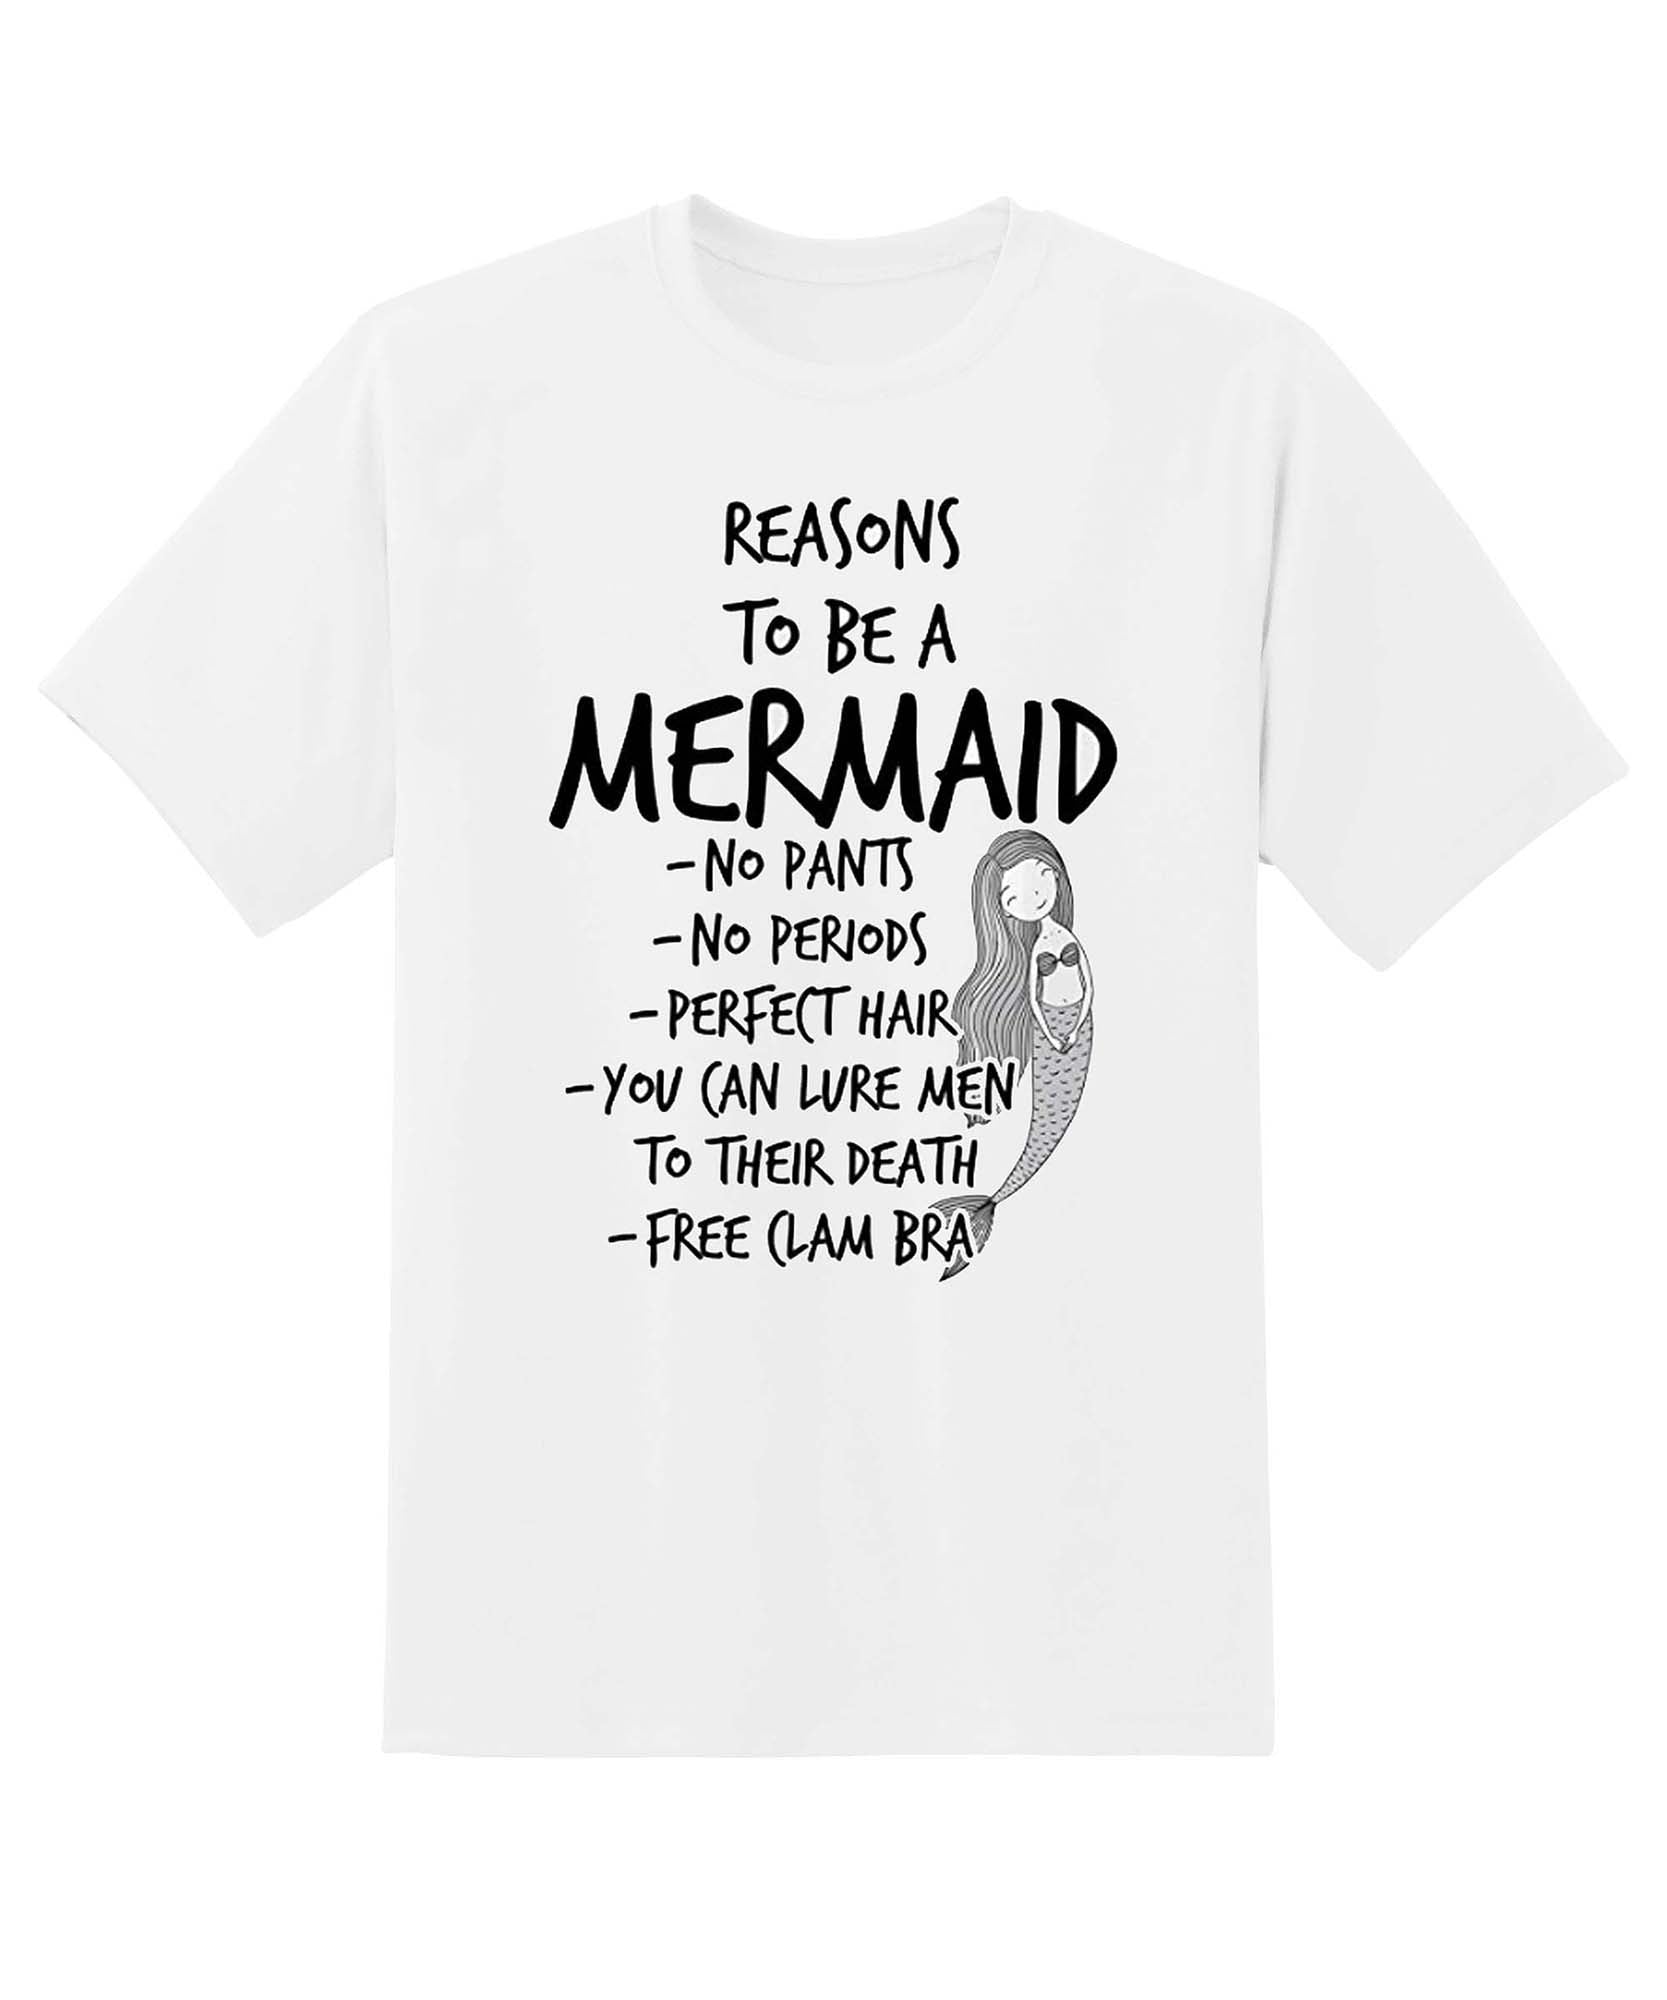 Skitongift Reasons To Be Mermaids Funny Sarcasm Sarcastic Motivational Inspirational Birthday Gifts For Friends Coworkers Siblings Mom Funny Shirt